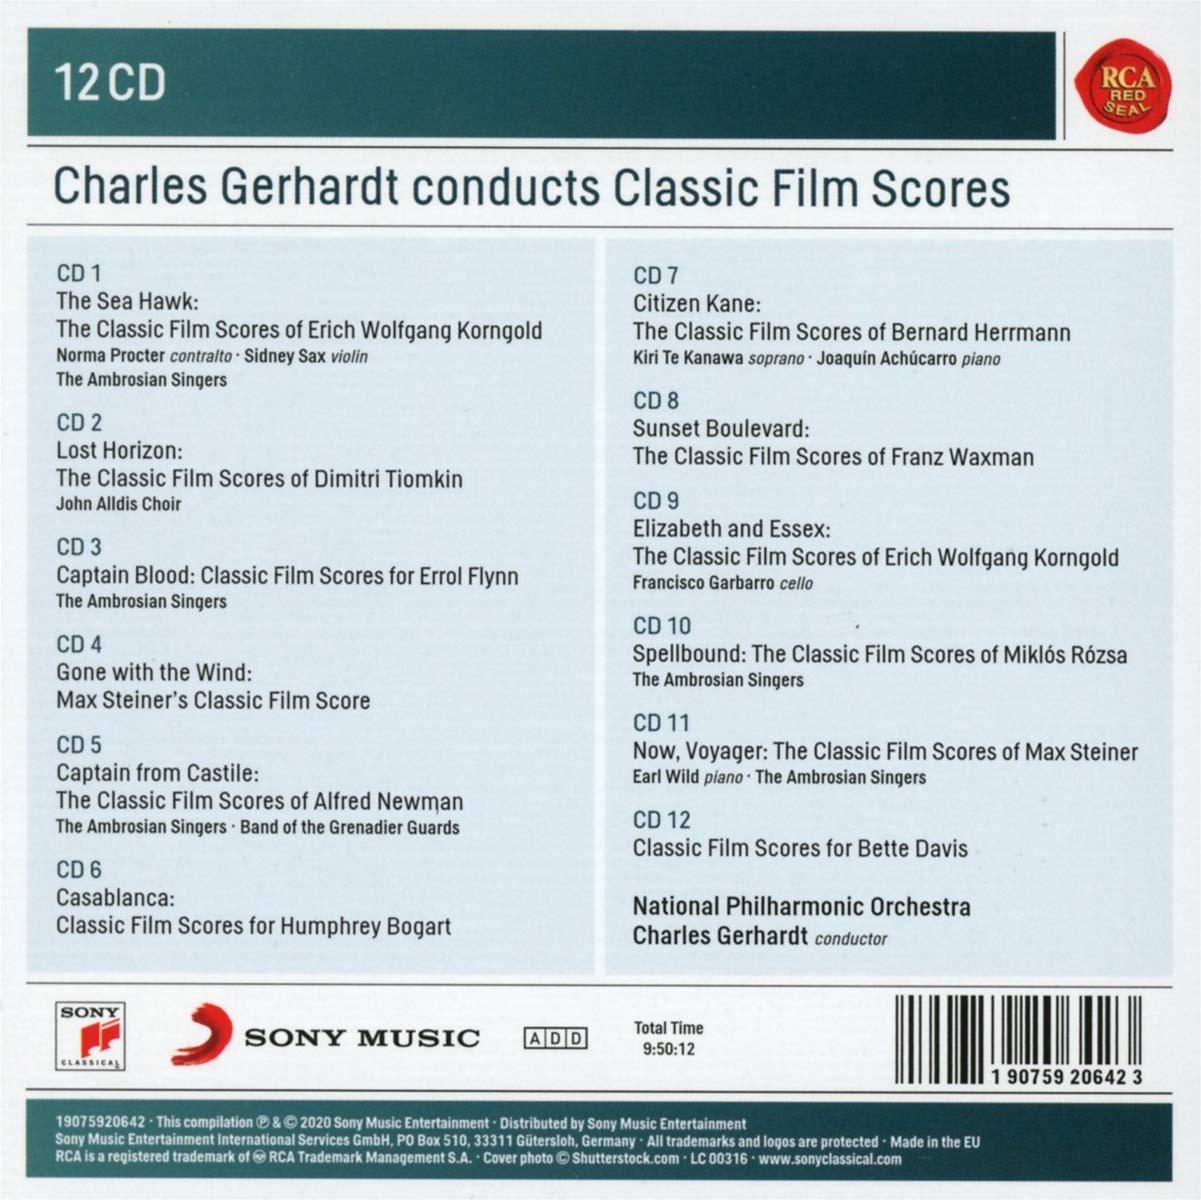 CHARLES GERHARDT CONDUCTS CLASSIC FILM SCORES (12 CDS)